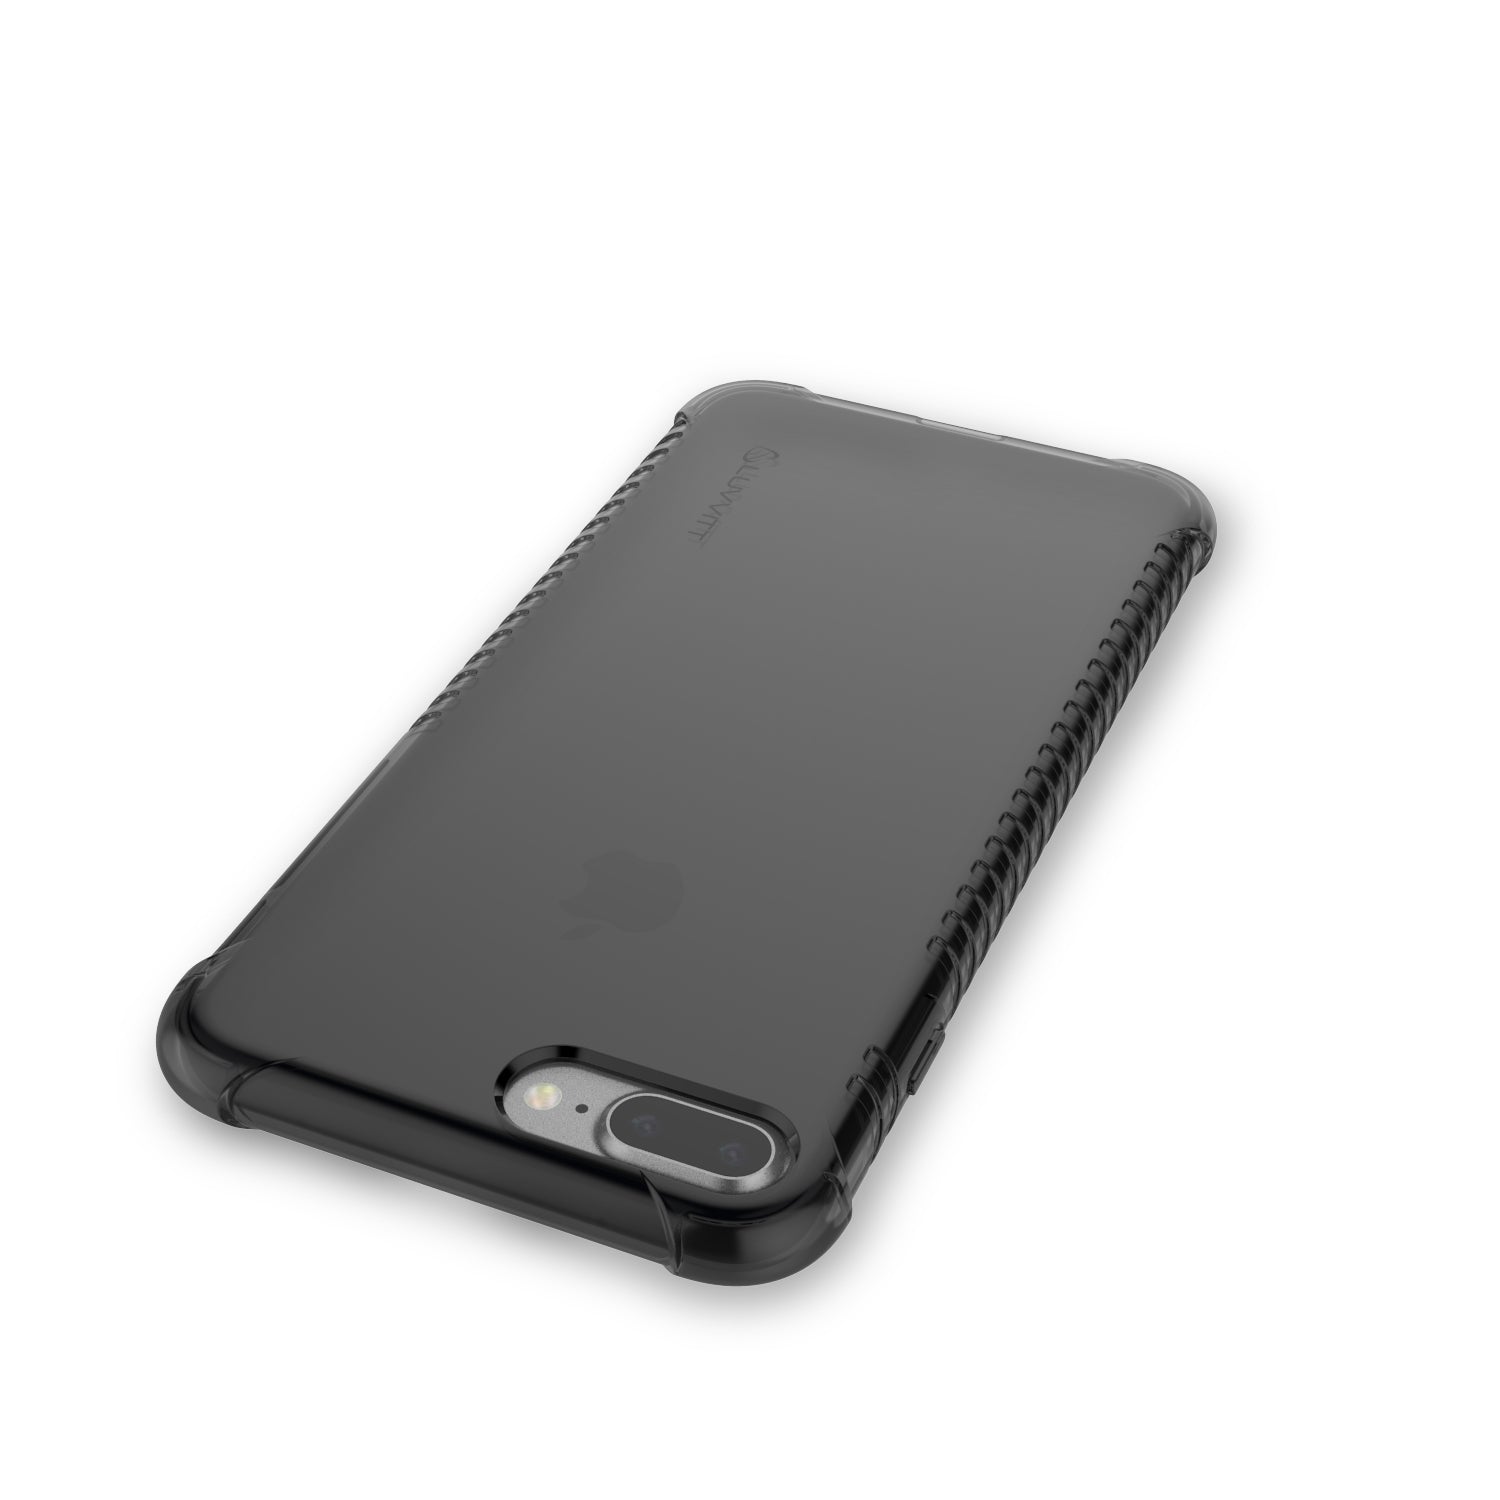 Luvvitt Clear Grip Flexible TPU Case for iPhone 7 Plus and 8 Plus - Black